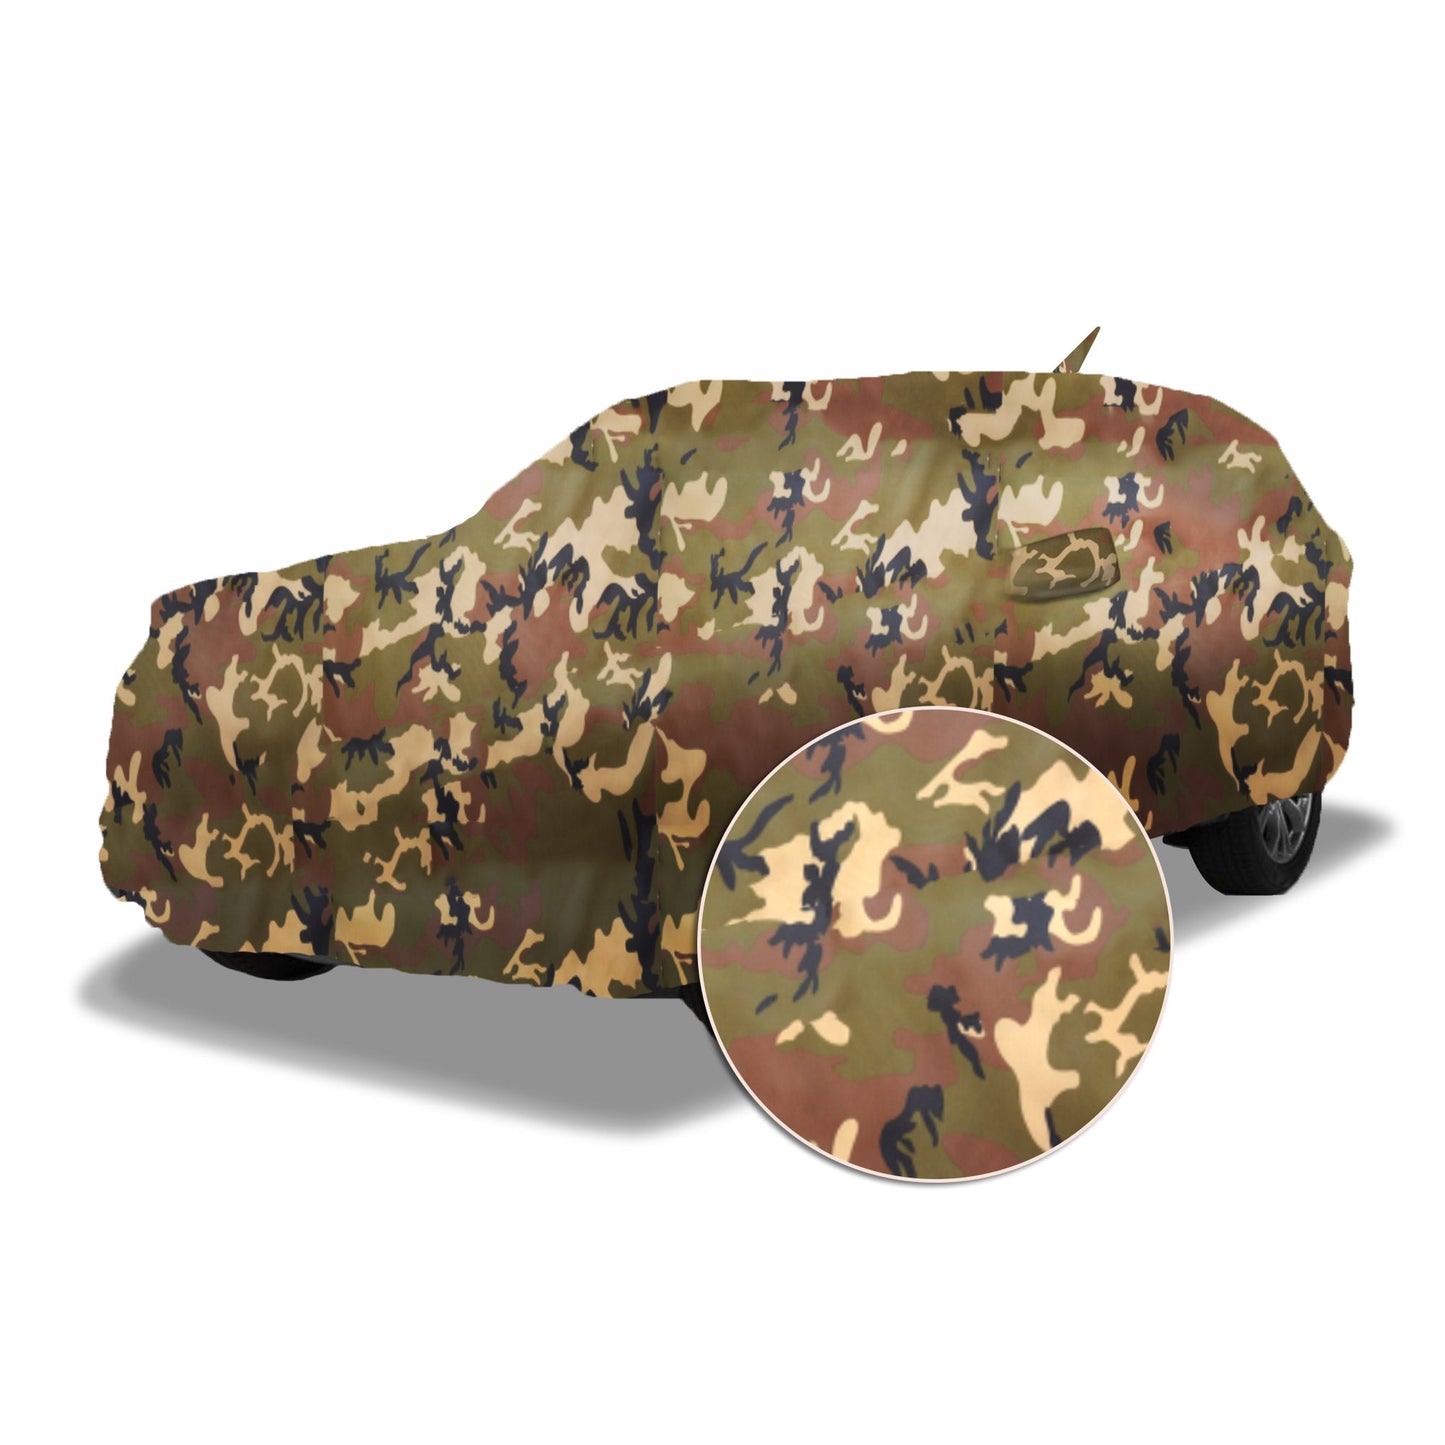 Ascot Toyota Glanza Car Body Cover Extra Strong & Dust Proof Jungle Military Car Cover with UV Proof & Water-Resistant Coating